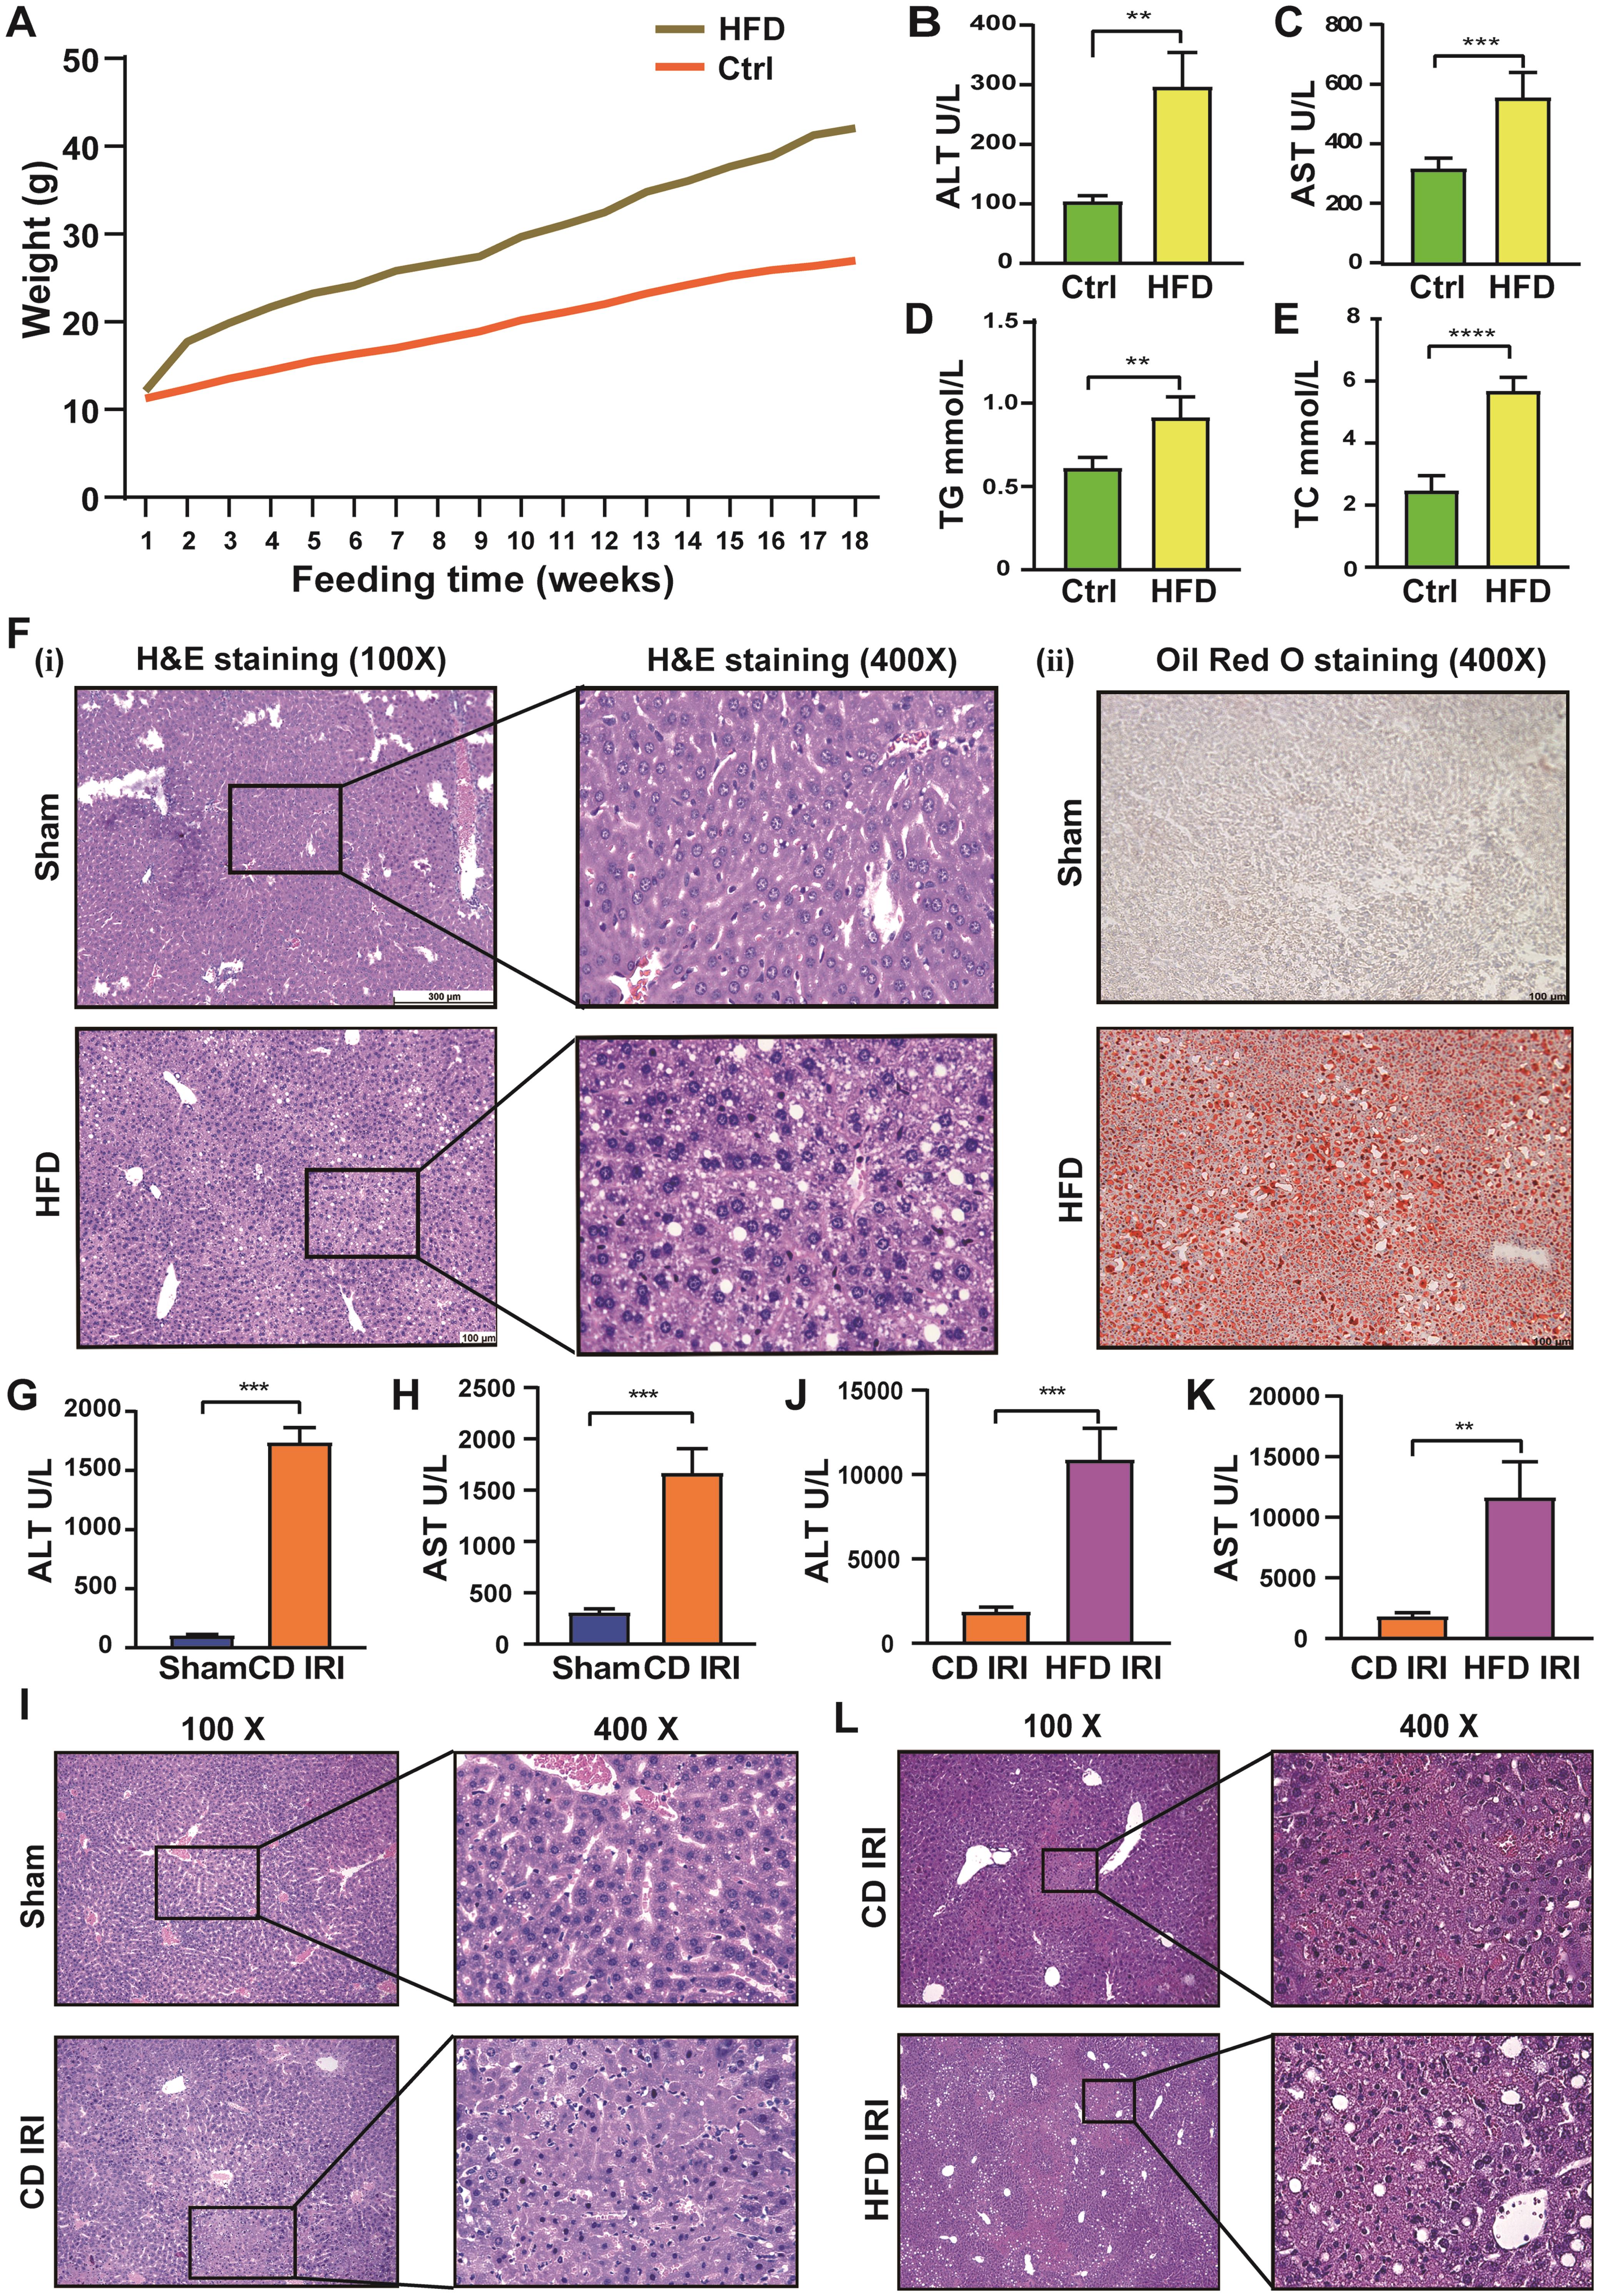 Ischemia-reperfusion injury was significantly increased in mice with fatty livers.